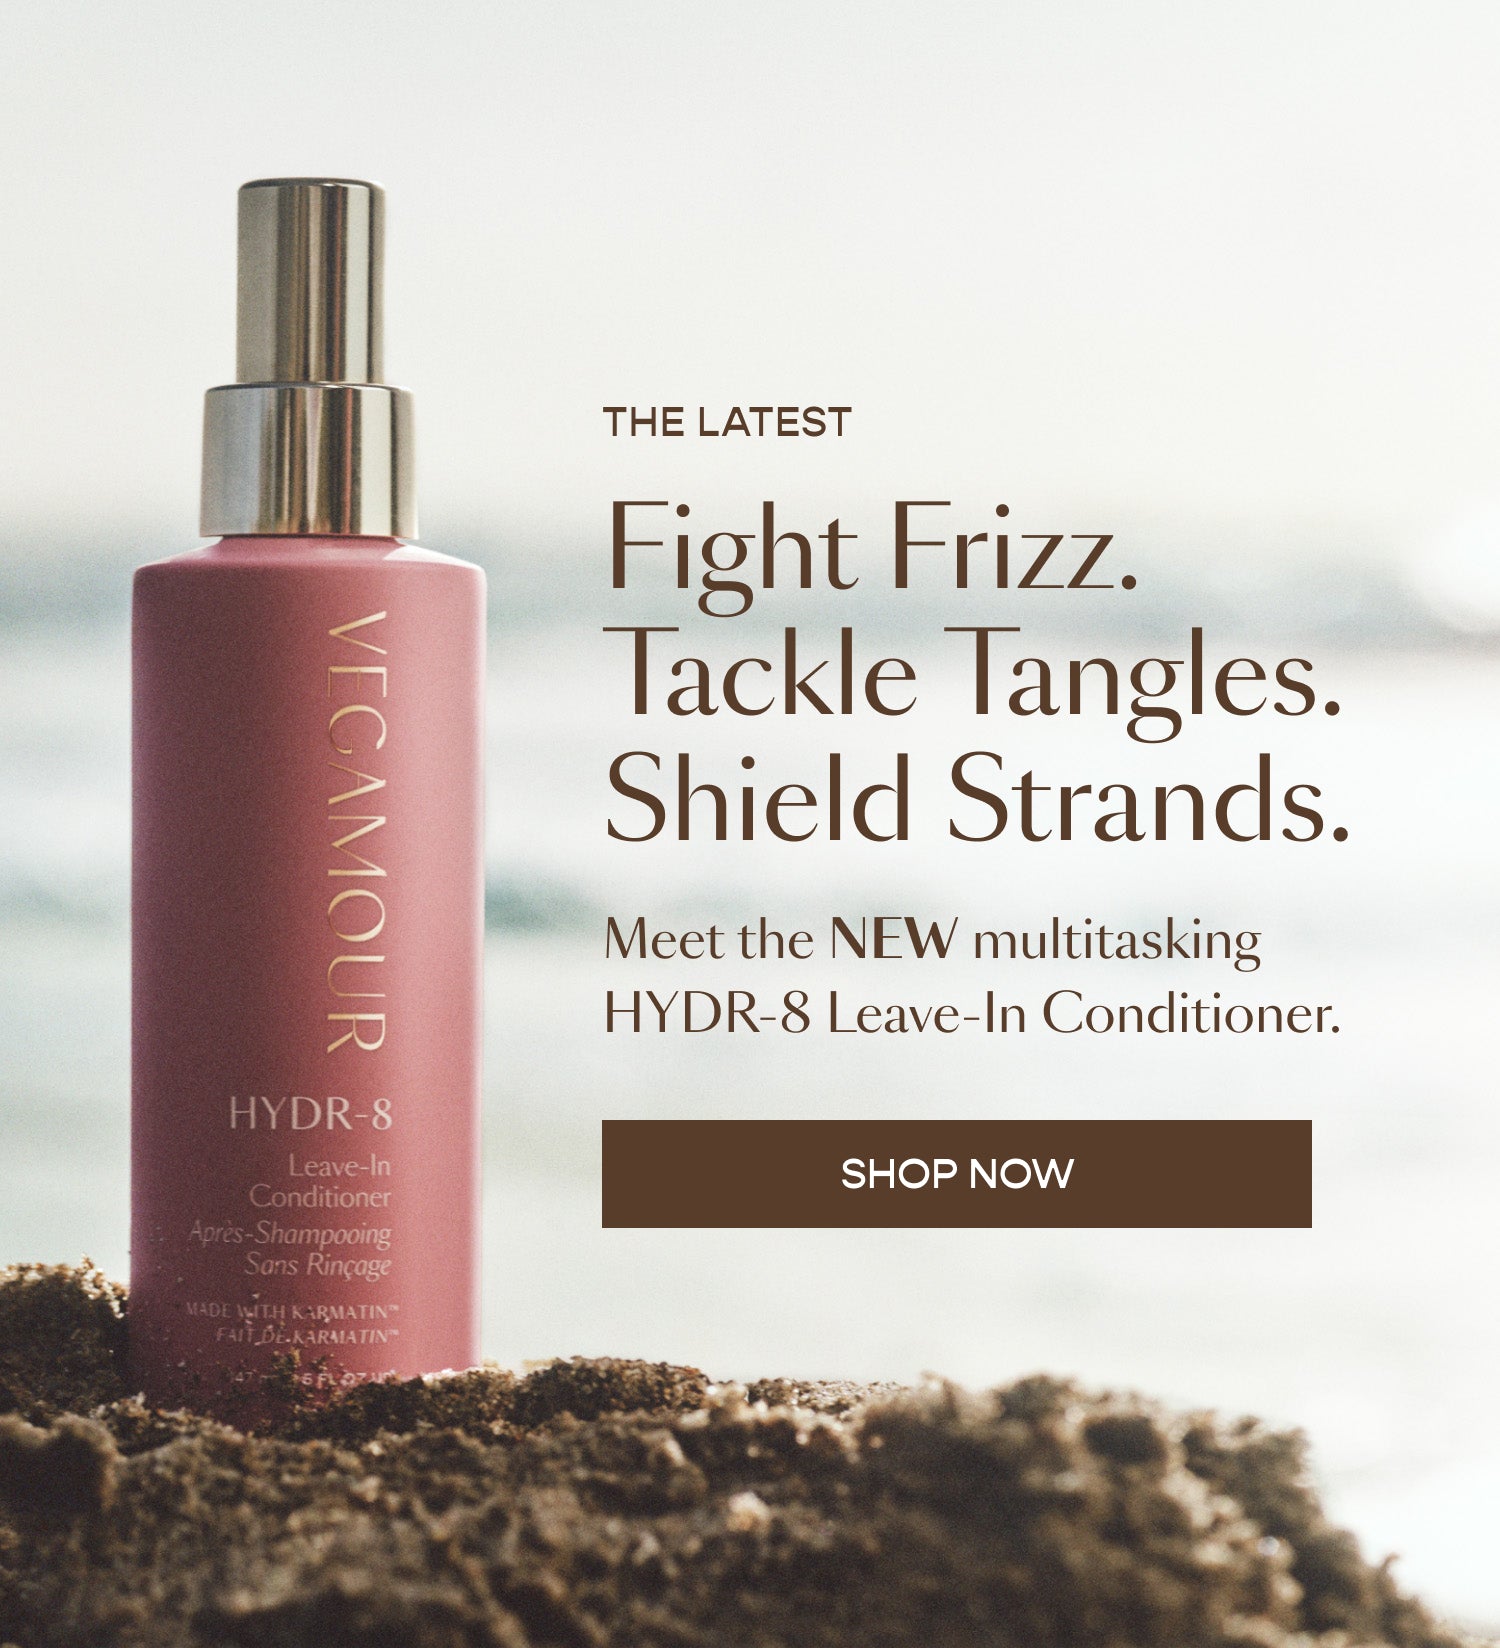 HYDR-8 Leave-In Conditioner